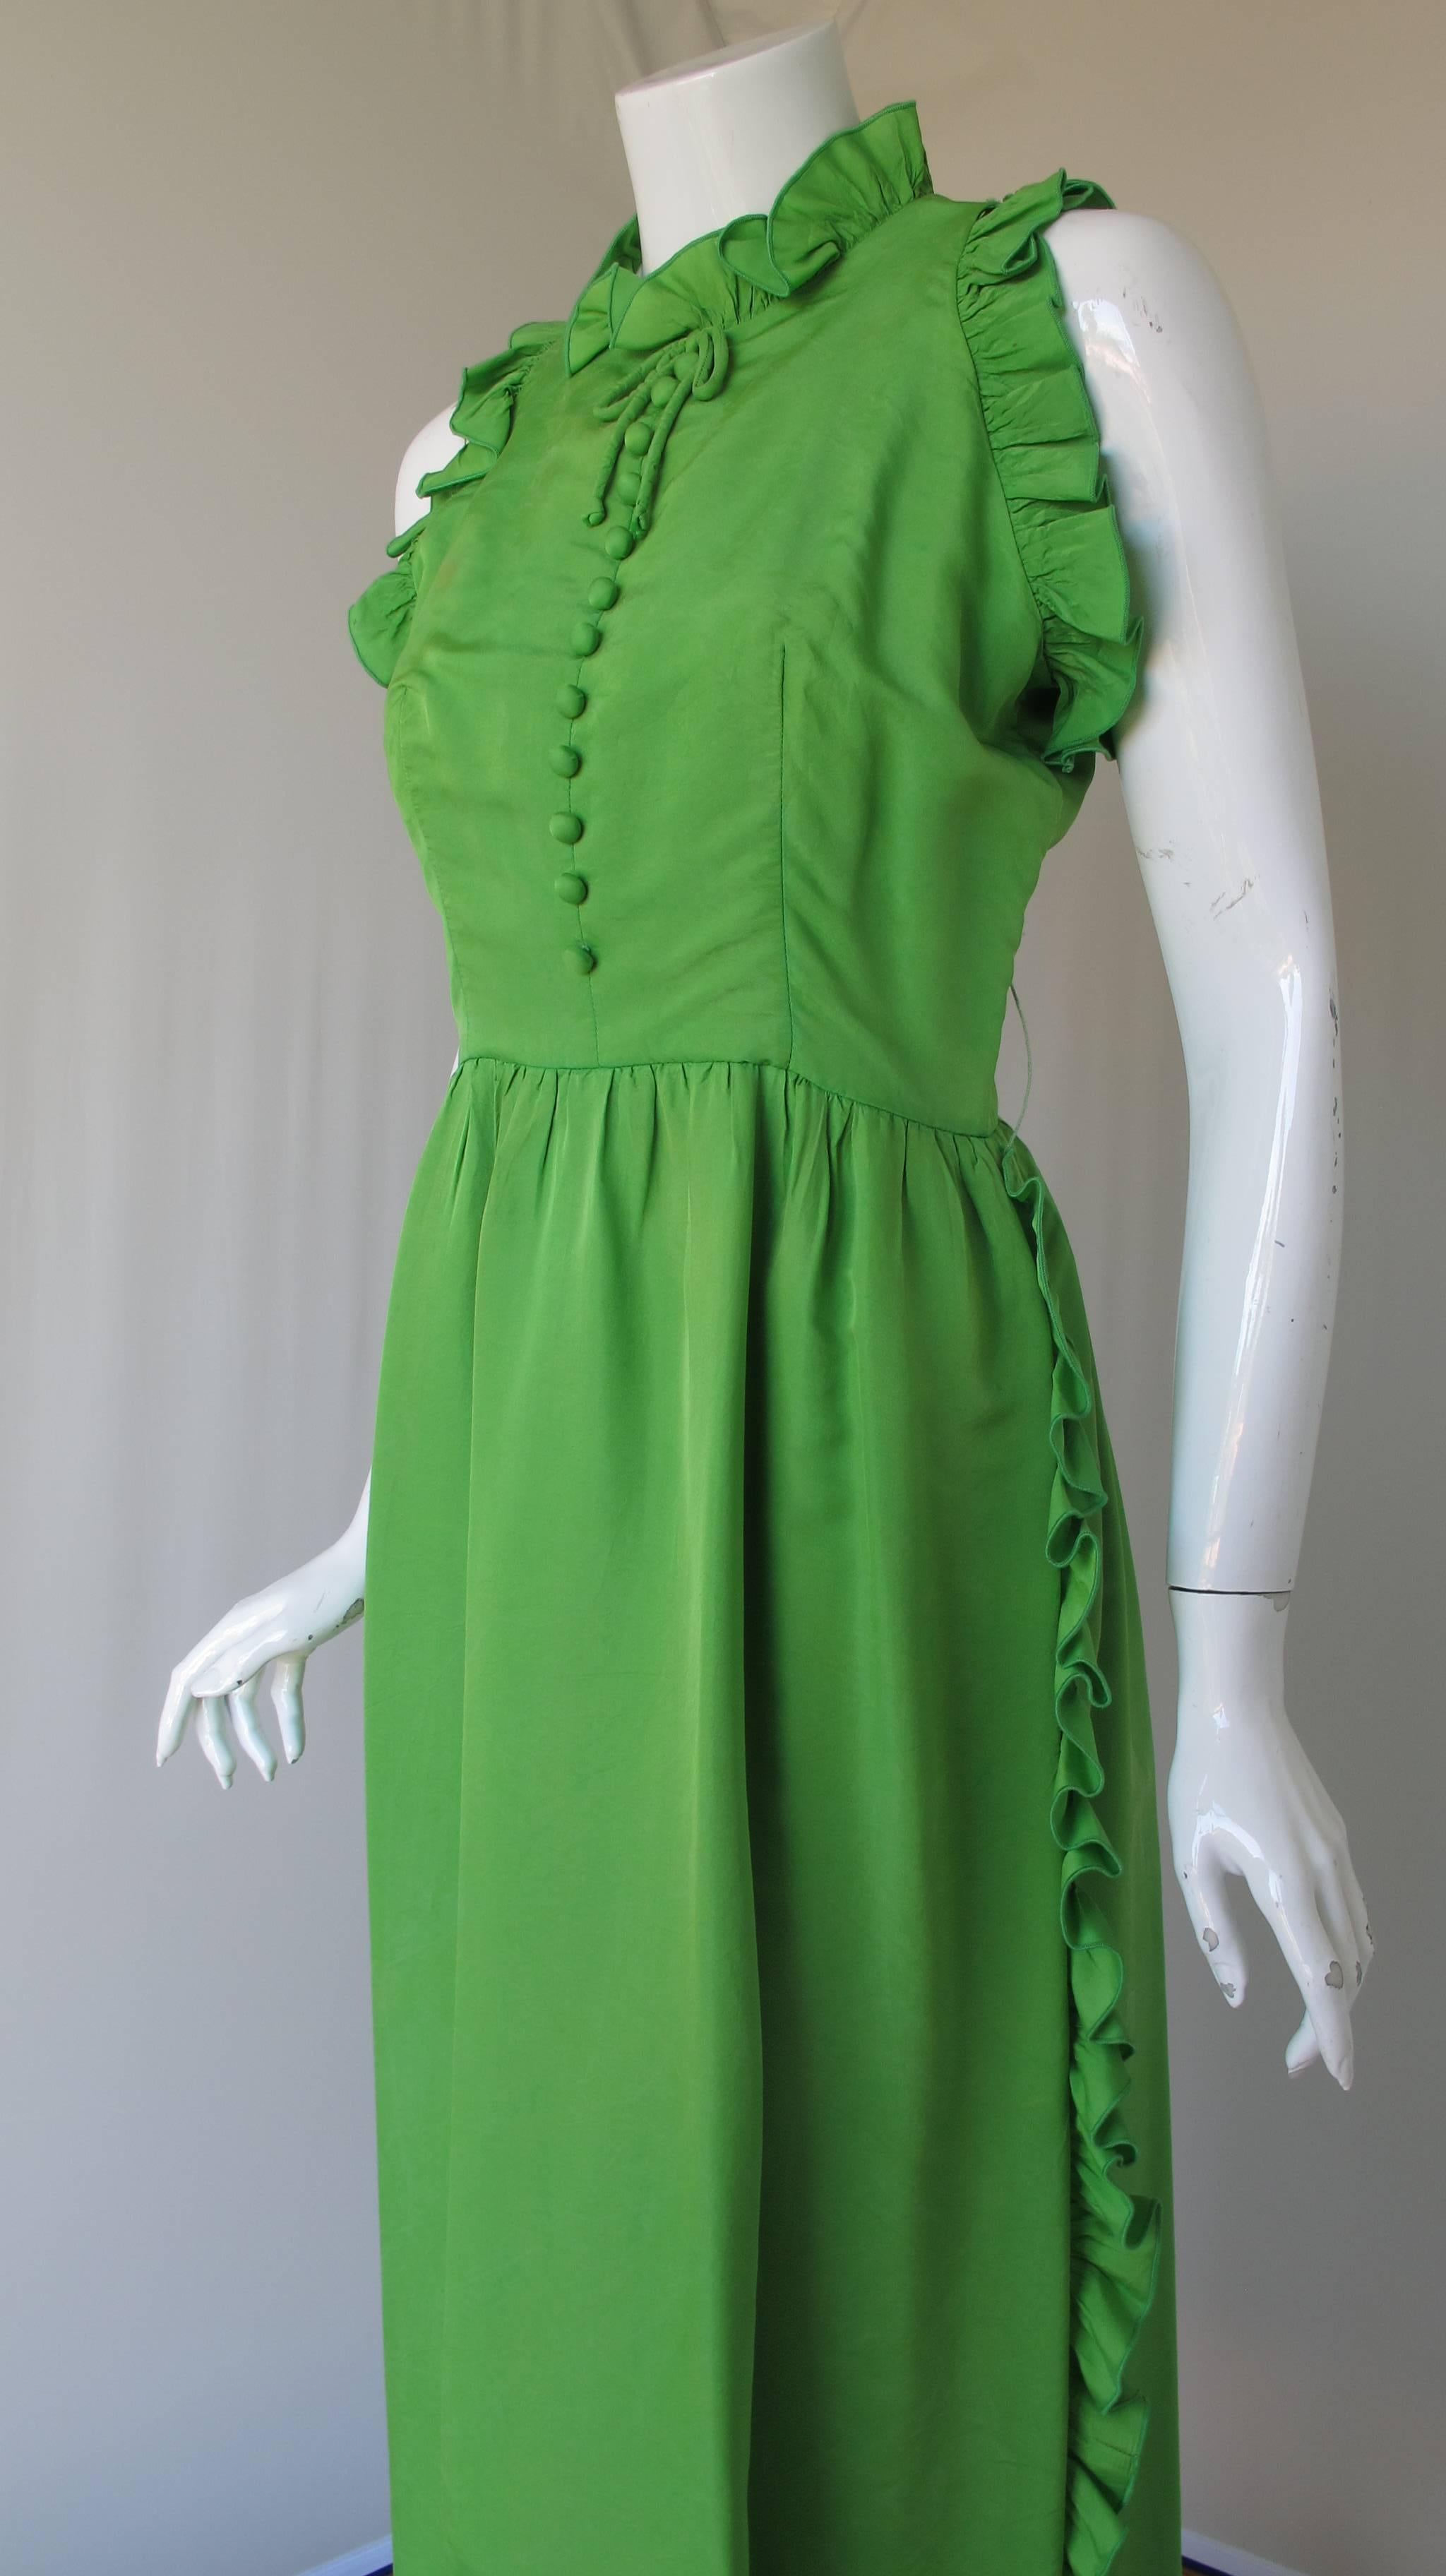 A 1970's Oscar de la Renta bright green washed silk sleeveless evening gown with ruffle detail, silk buttons and bow at the neckline. Lined at the interior. In good to very good condition with a small stain at the bodice front, missing belt and a